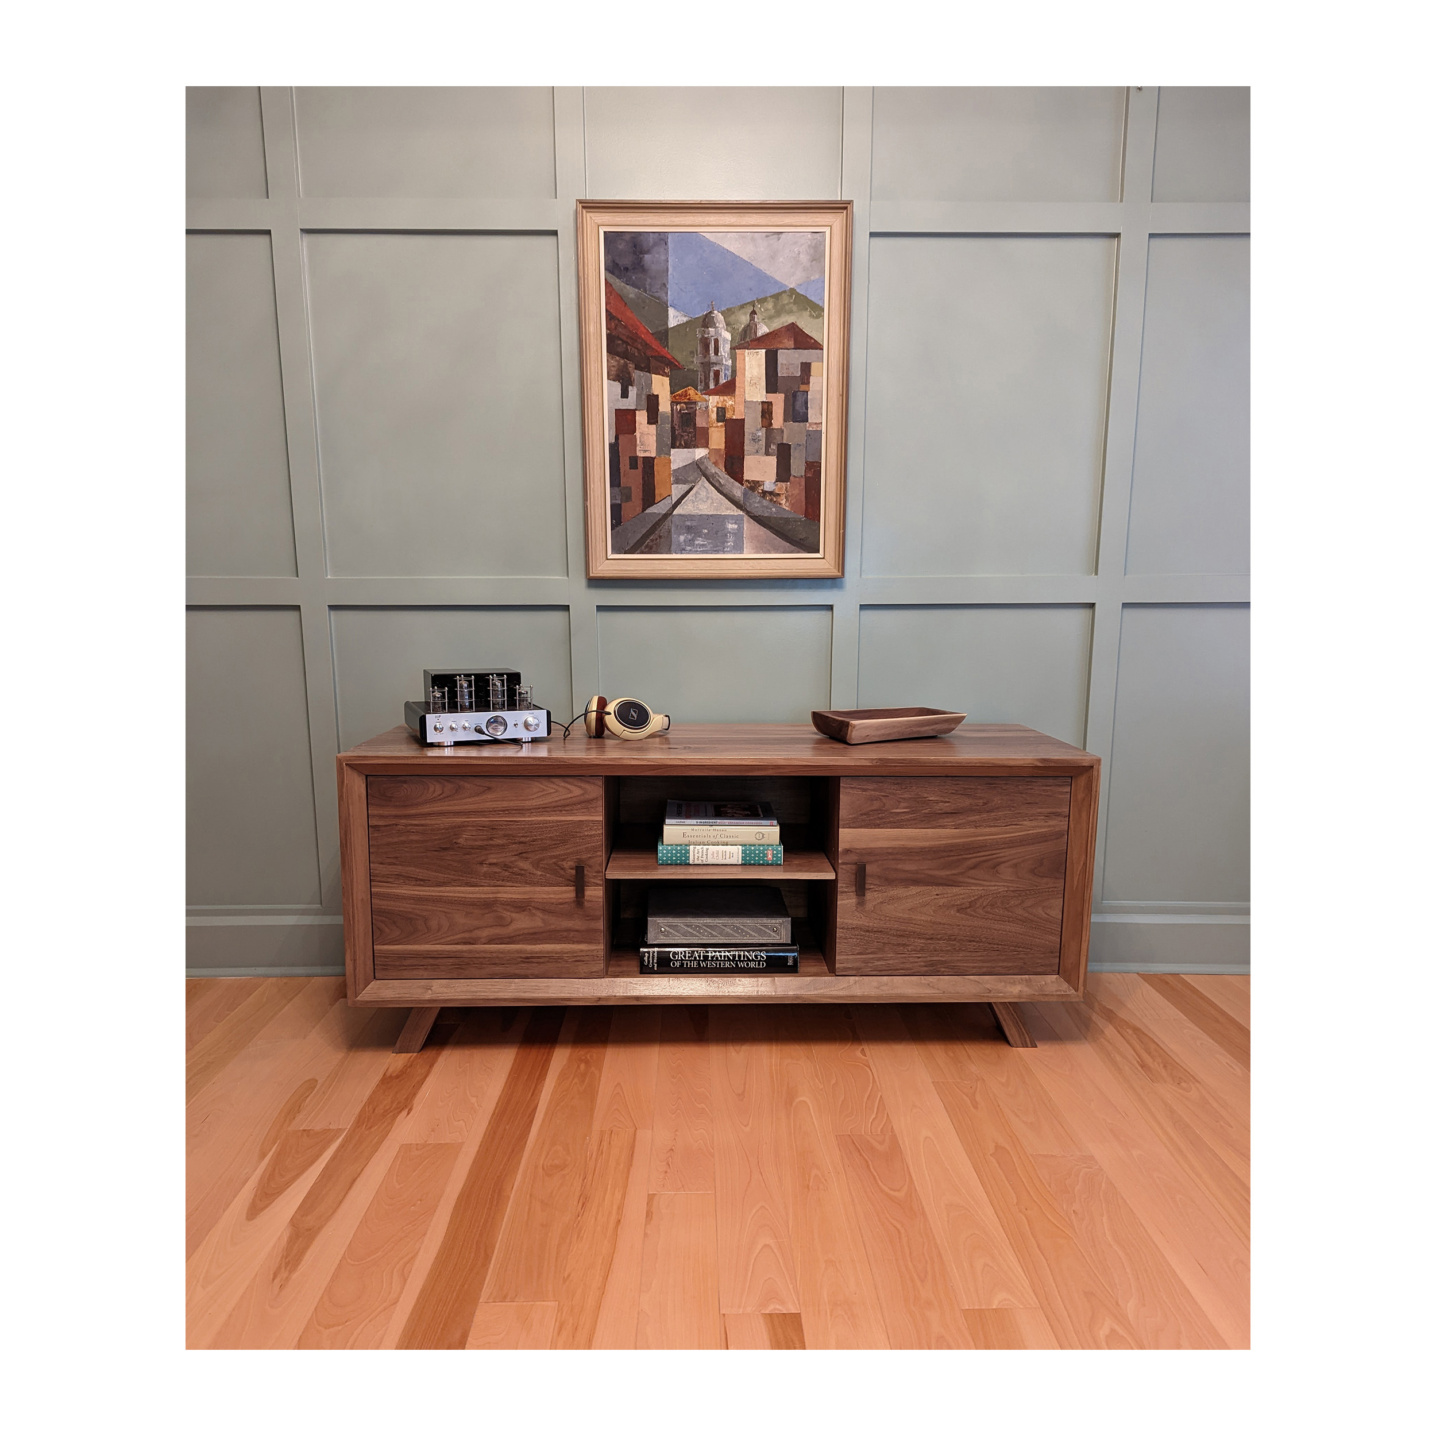 Solid Walnut Media Console - Custom made in Ohio with locally grown hardwoods